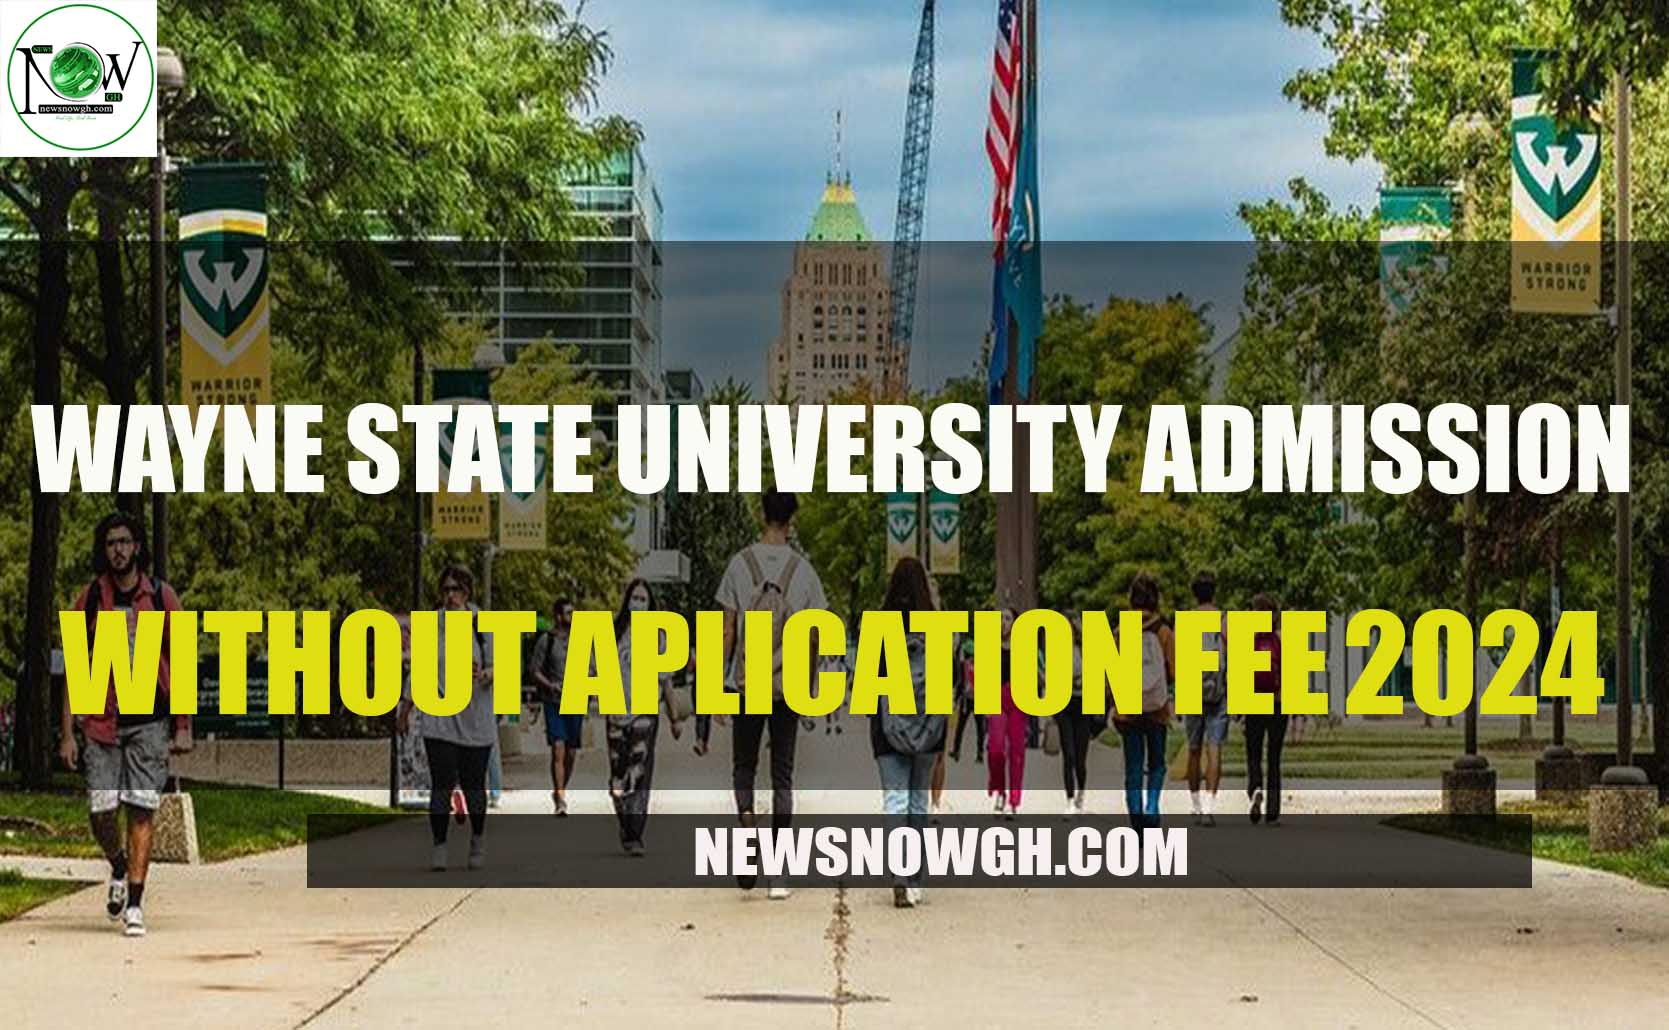 Wayne State University admissions without application fee for 202425